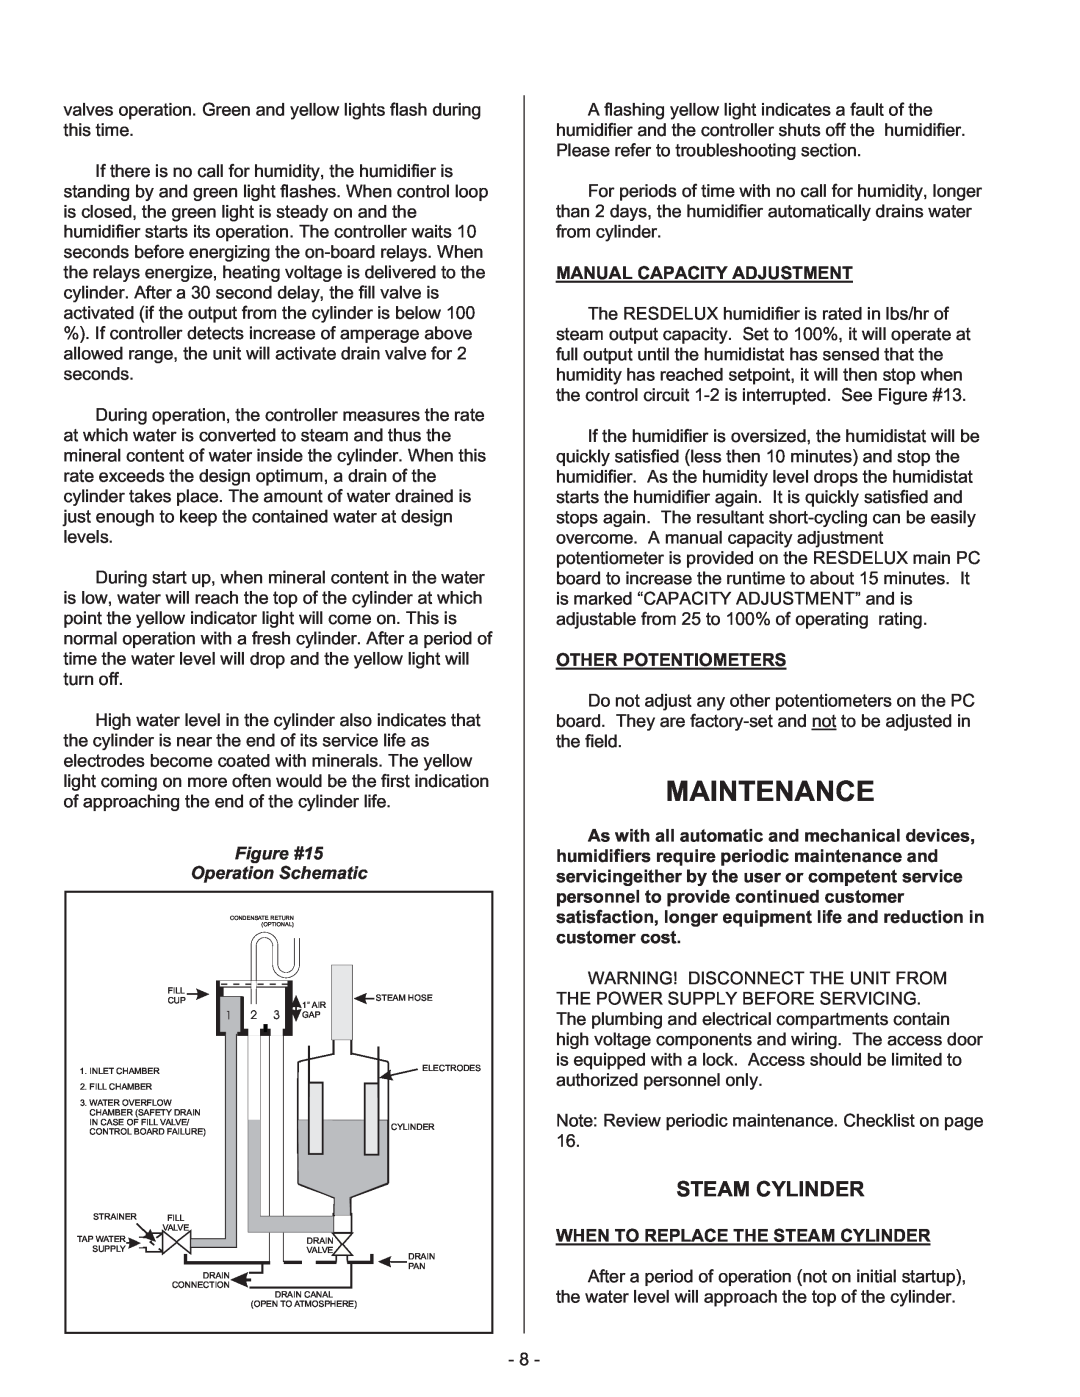 Nortec RESDELUX manual Maintenance, Steam Cylinder, Figure #15 Operation Schematic, Manual Capacity Adjustment 